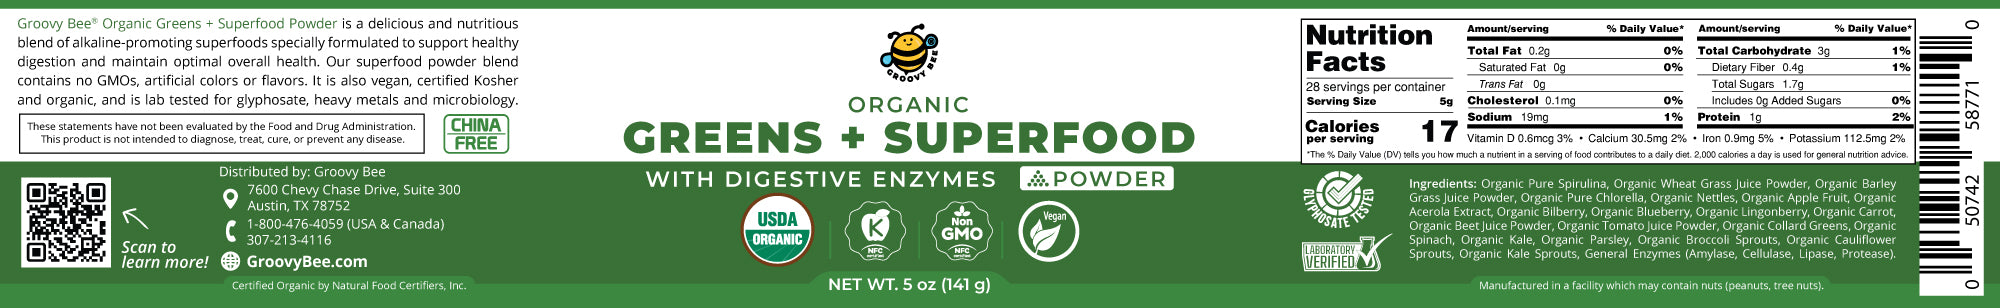 Organic Greens + Superfood Powder With Digestive Enzymes 5 oz (141 g) (3-Pack)